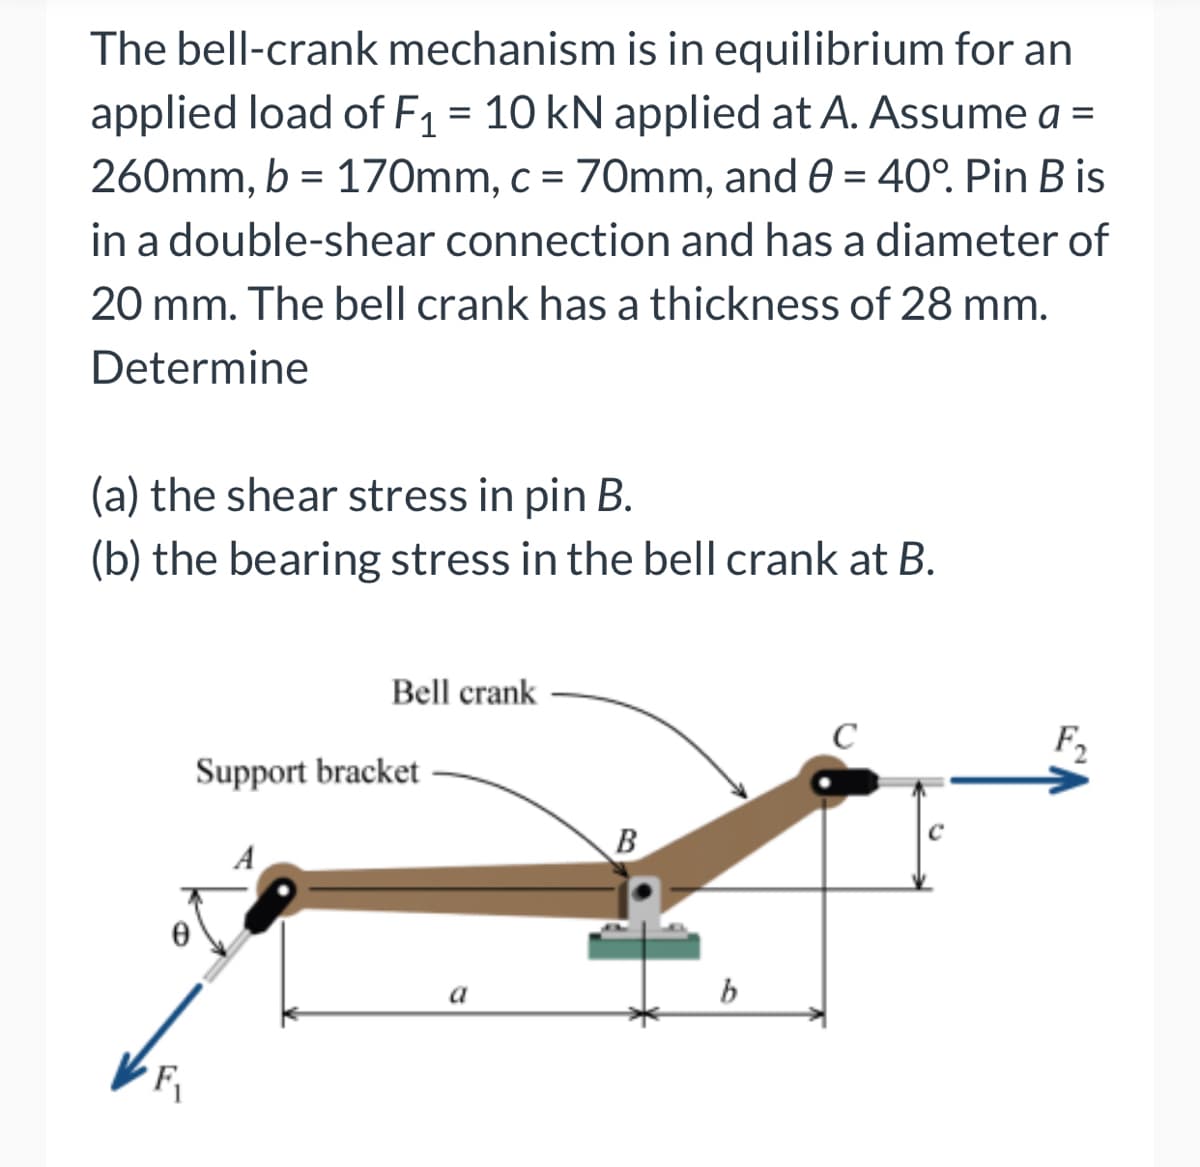 The bell-crank mechanism is in equilibrium for an
applied load of F1 = 10 kN applied at A. Assume a =
260mm, b = 170mm, c = 70mm, and 0 = 40°. Pin B is
in a double-shear connection and has a diameter of
20 mm. The bell crank has a thickness of 28 mm.
Determine
(a) the shear stress in pin B.
(b) the bearing stress in the bell crank at B.
Bell crank
F2
Support bracket
B
A
a
b
F
